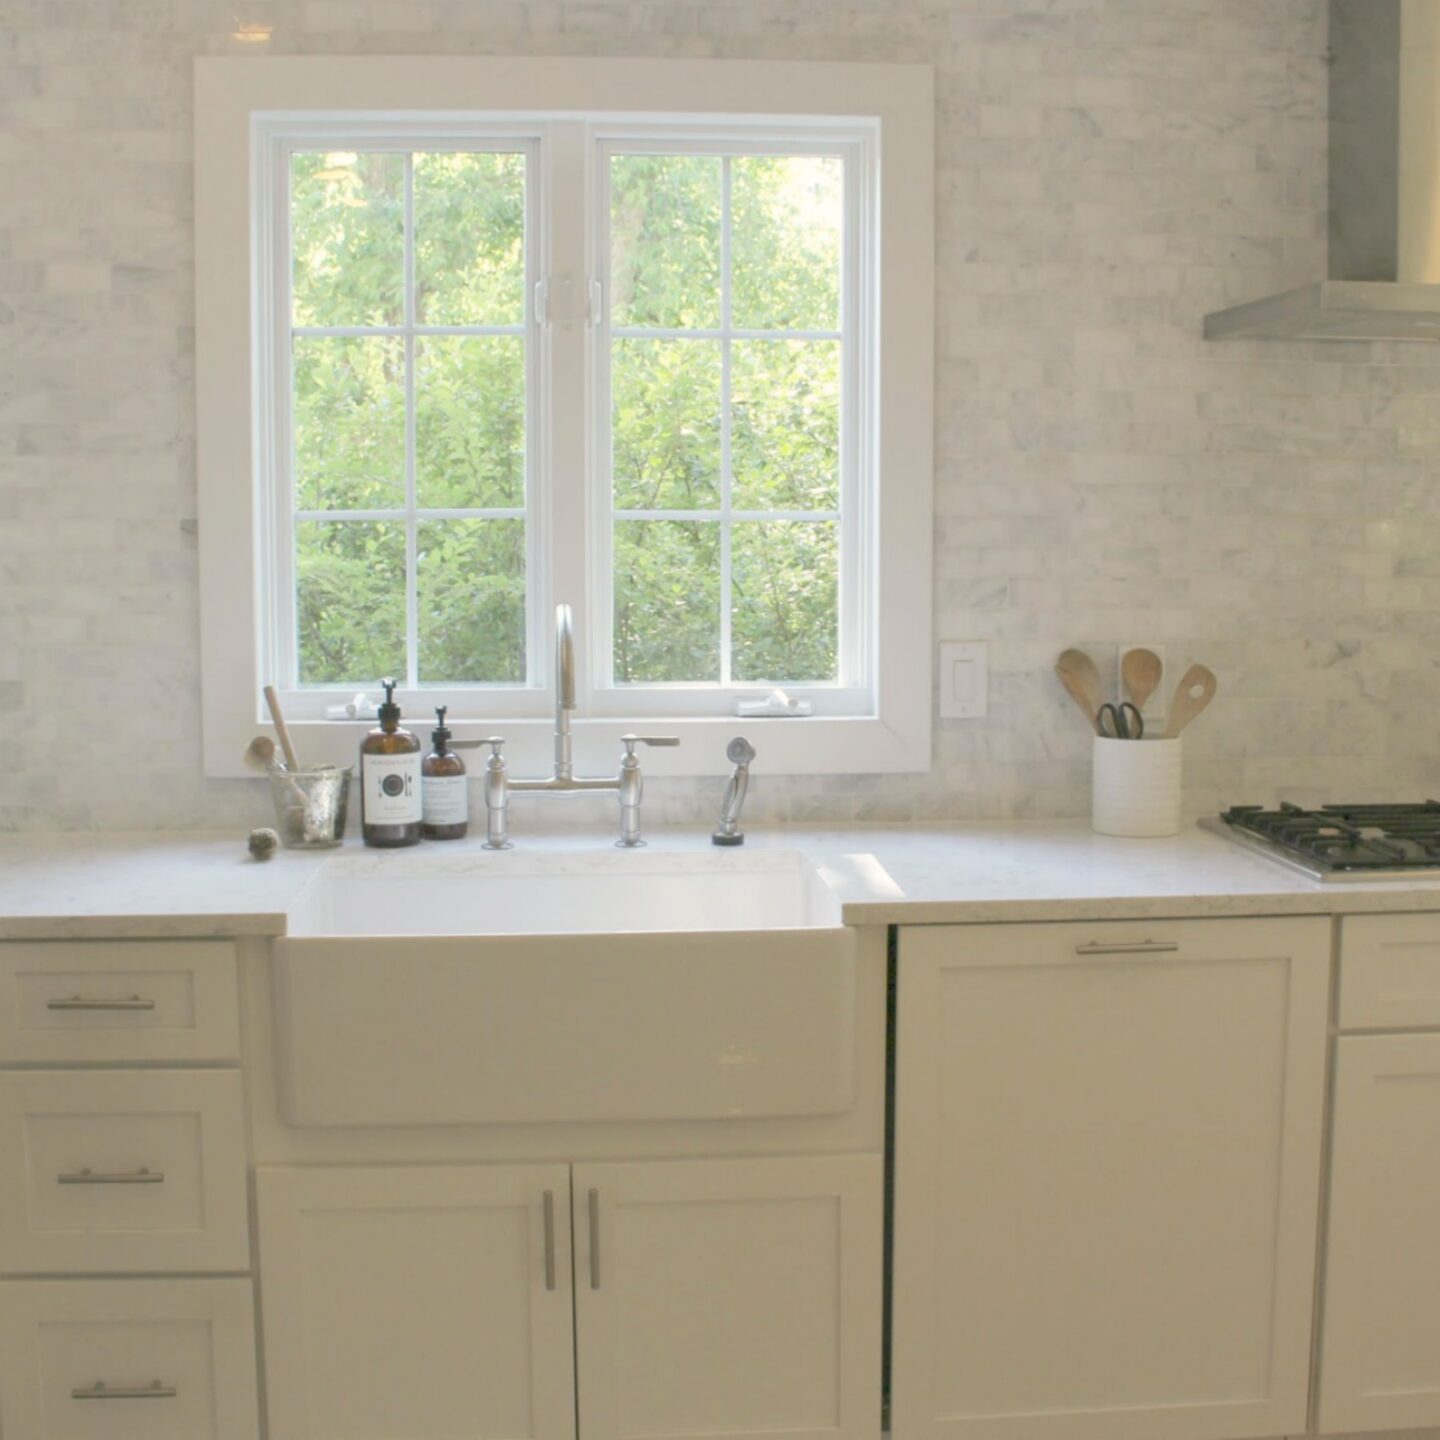 Classic white kitchen with fireclay farm sink - Hello Lovely Studio. #farmsink #classickitchen #kitchendesign #fireclaysink